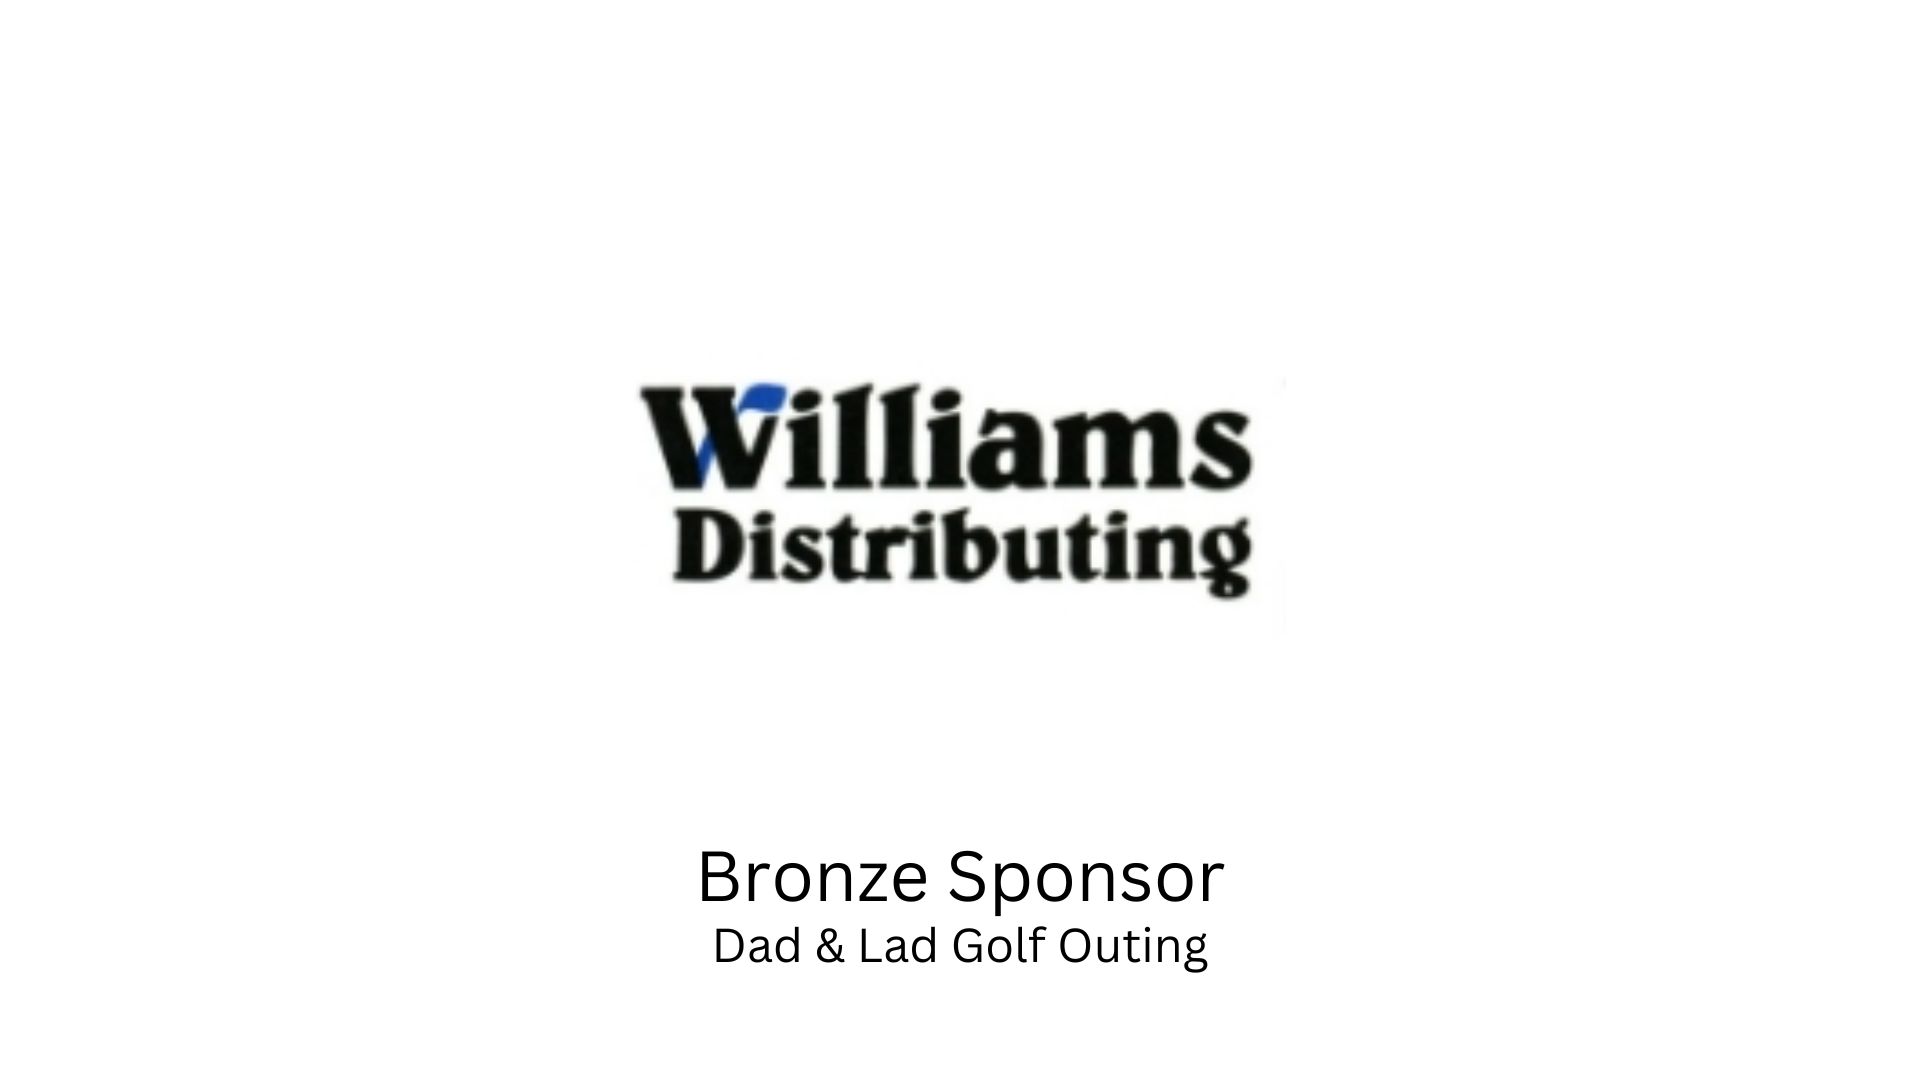 Williams Distibuting, a Bronze sponsor for the 2022 Dad and Lad golf outing